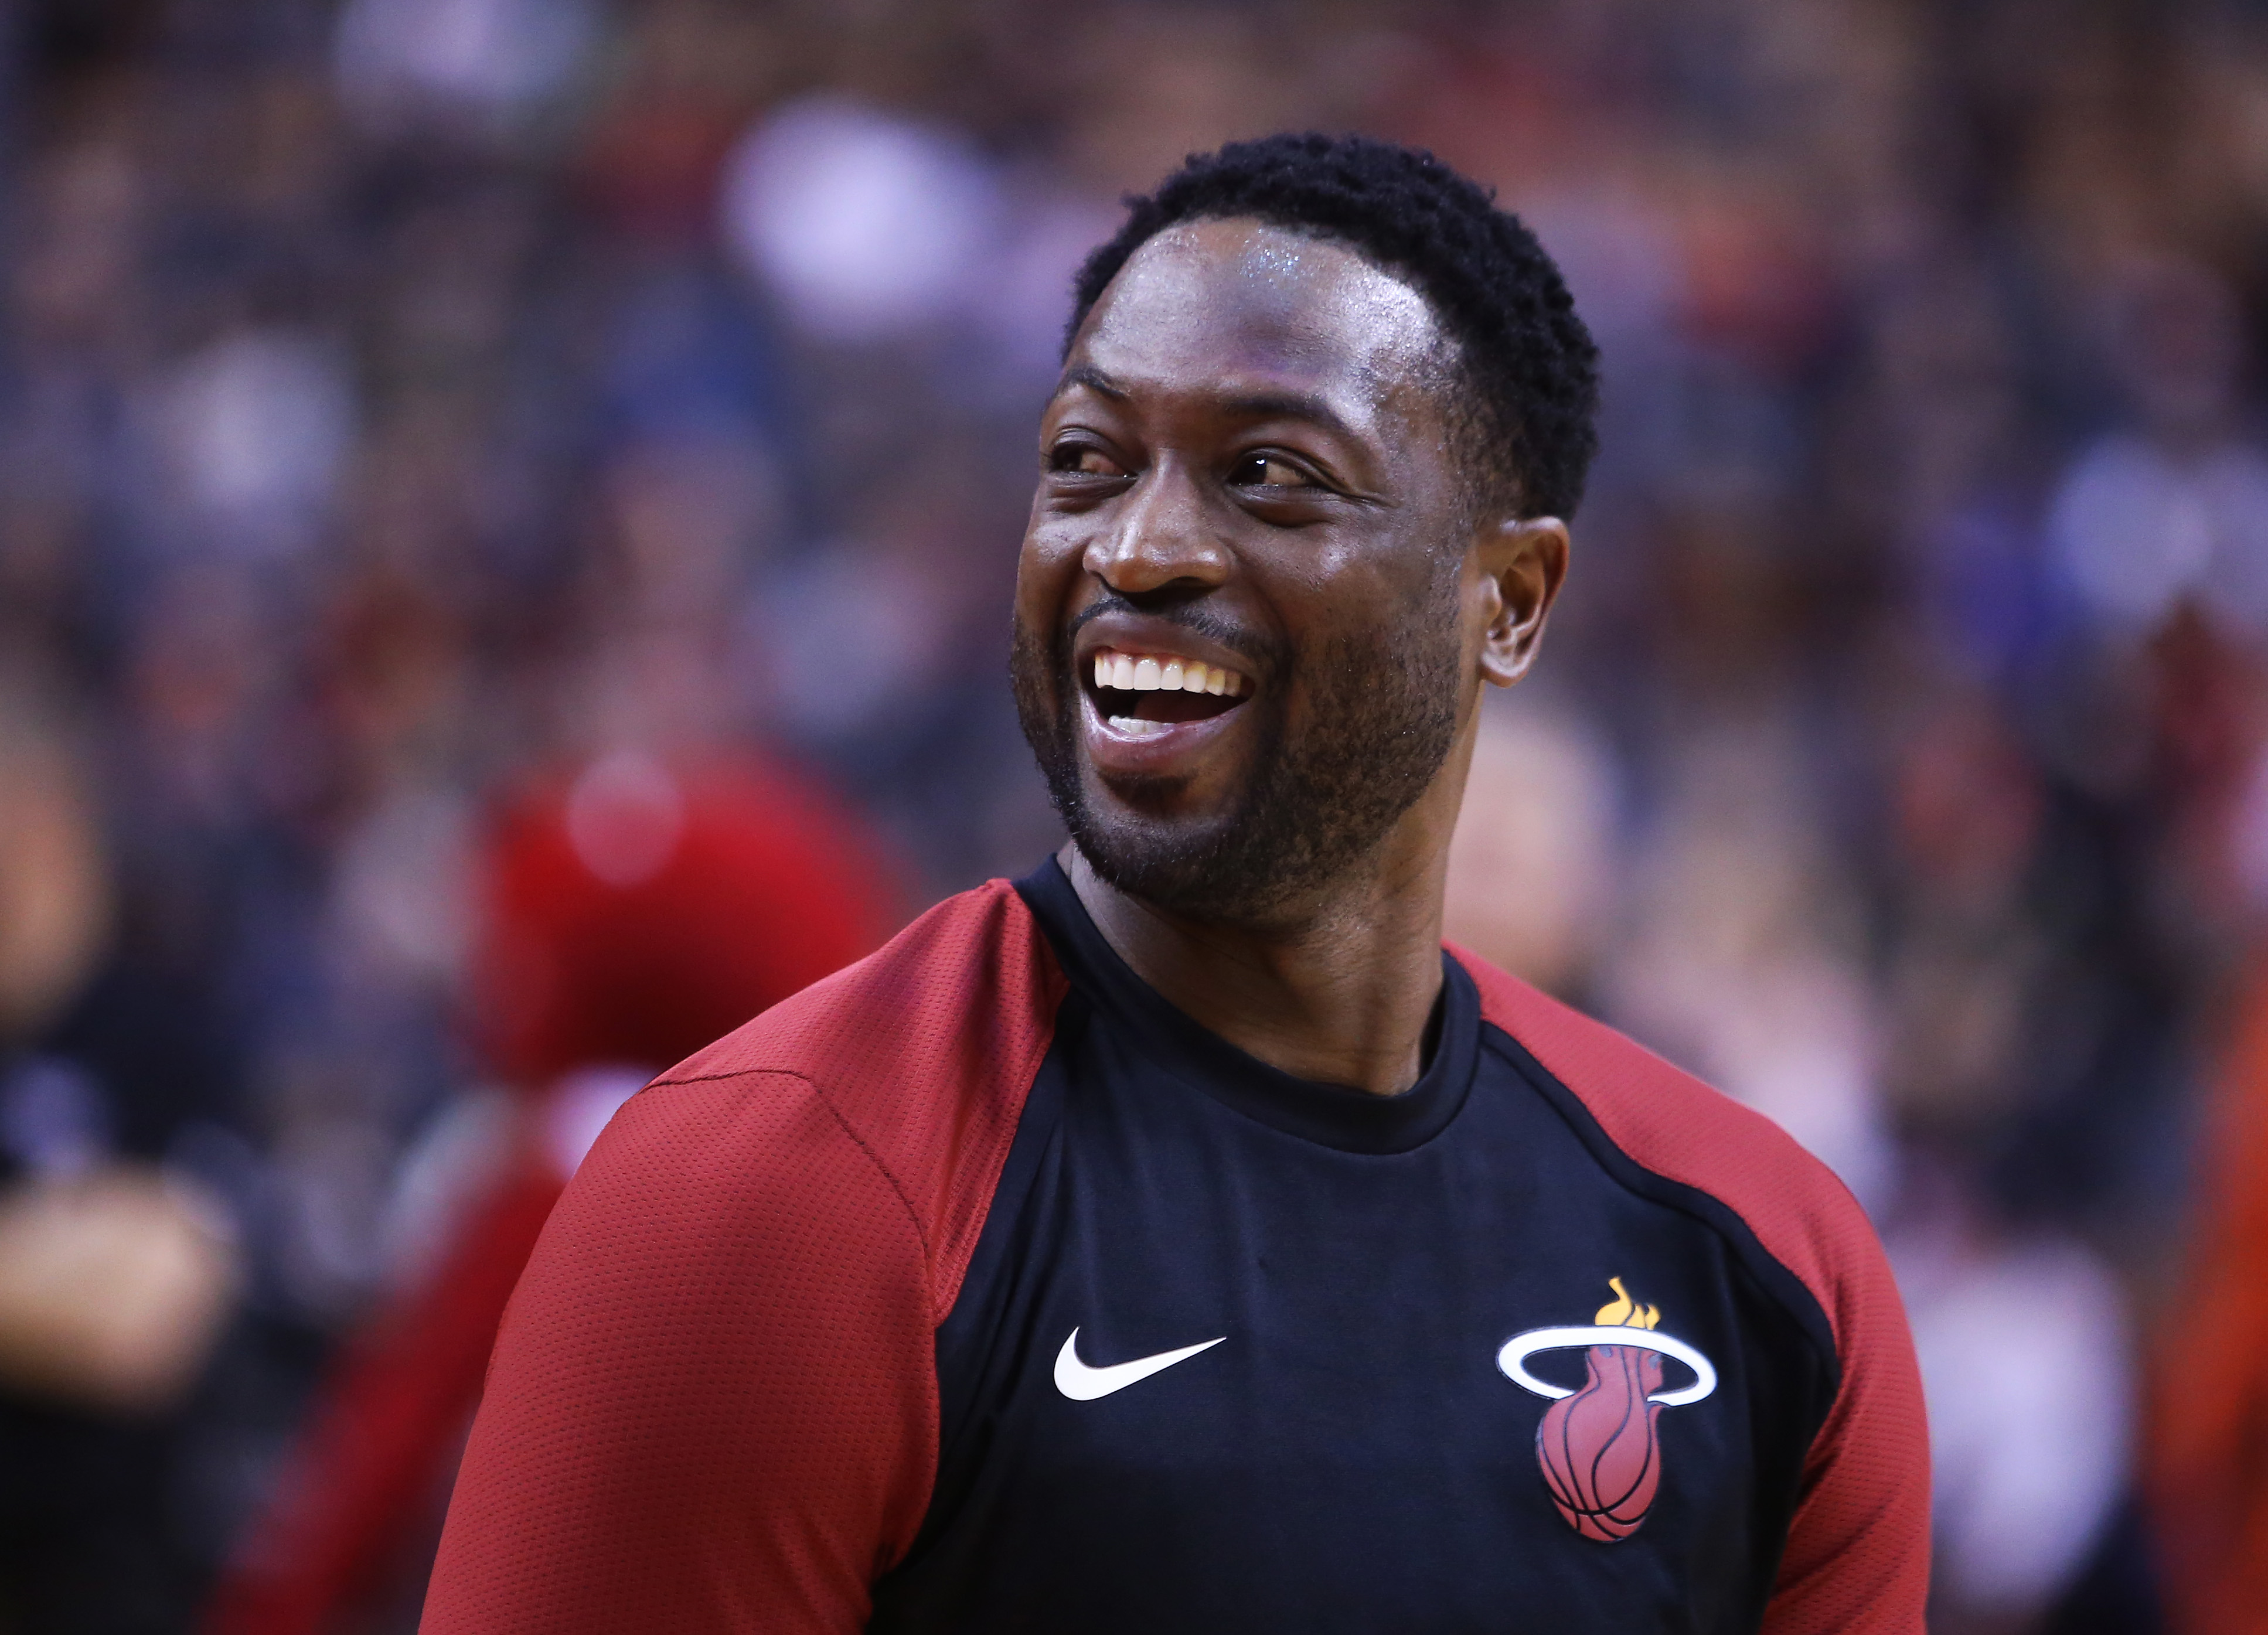 Dwyane Wade of the Miami Heat smiles during warm-ups prior to an NBA game against the Toronto Raptors.